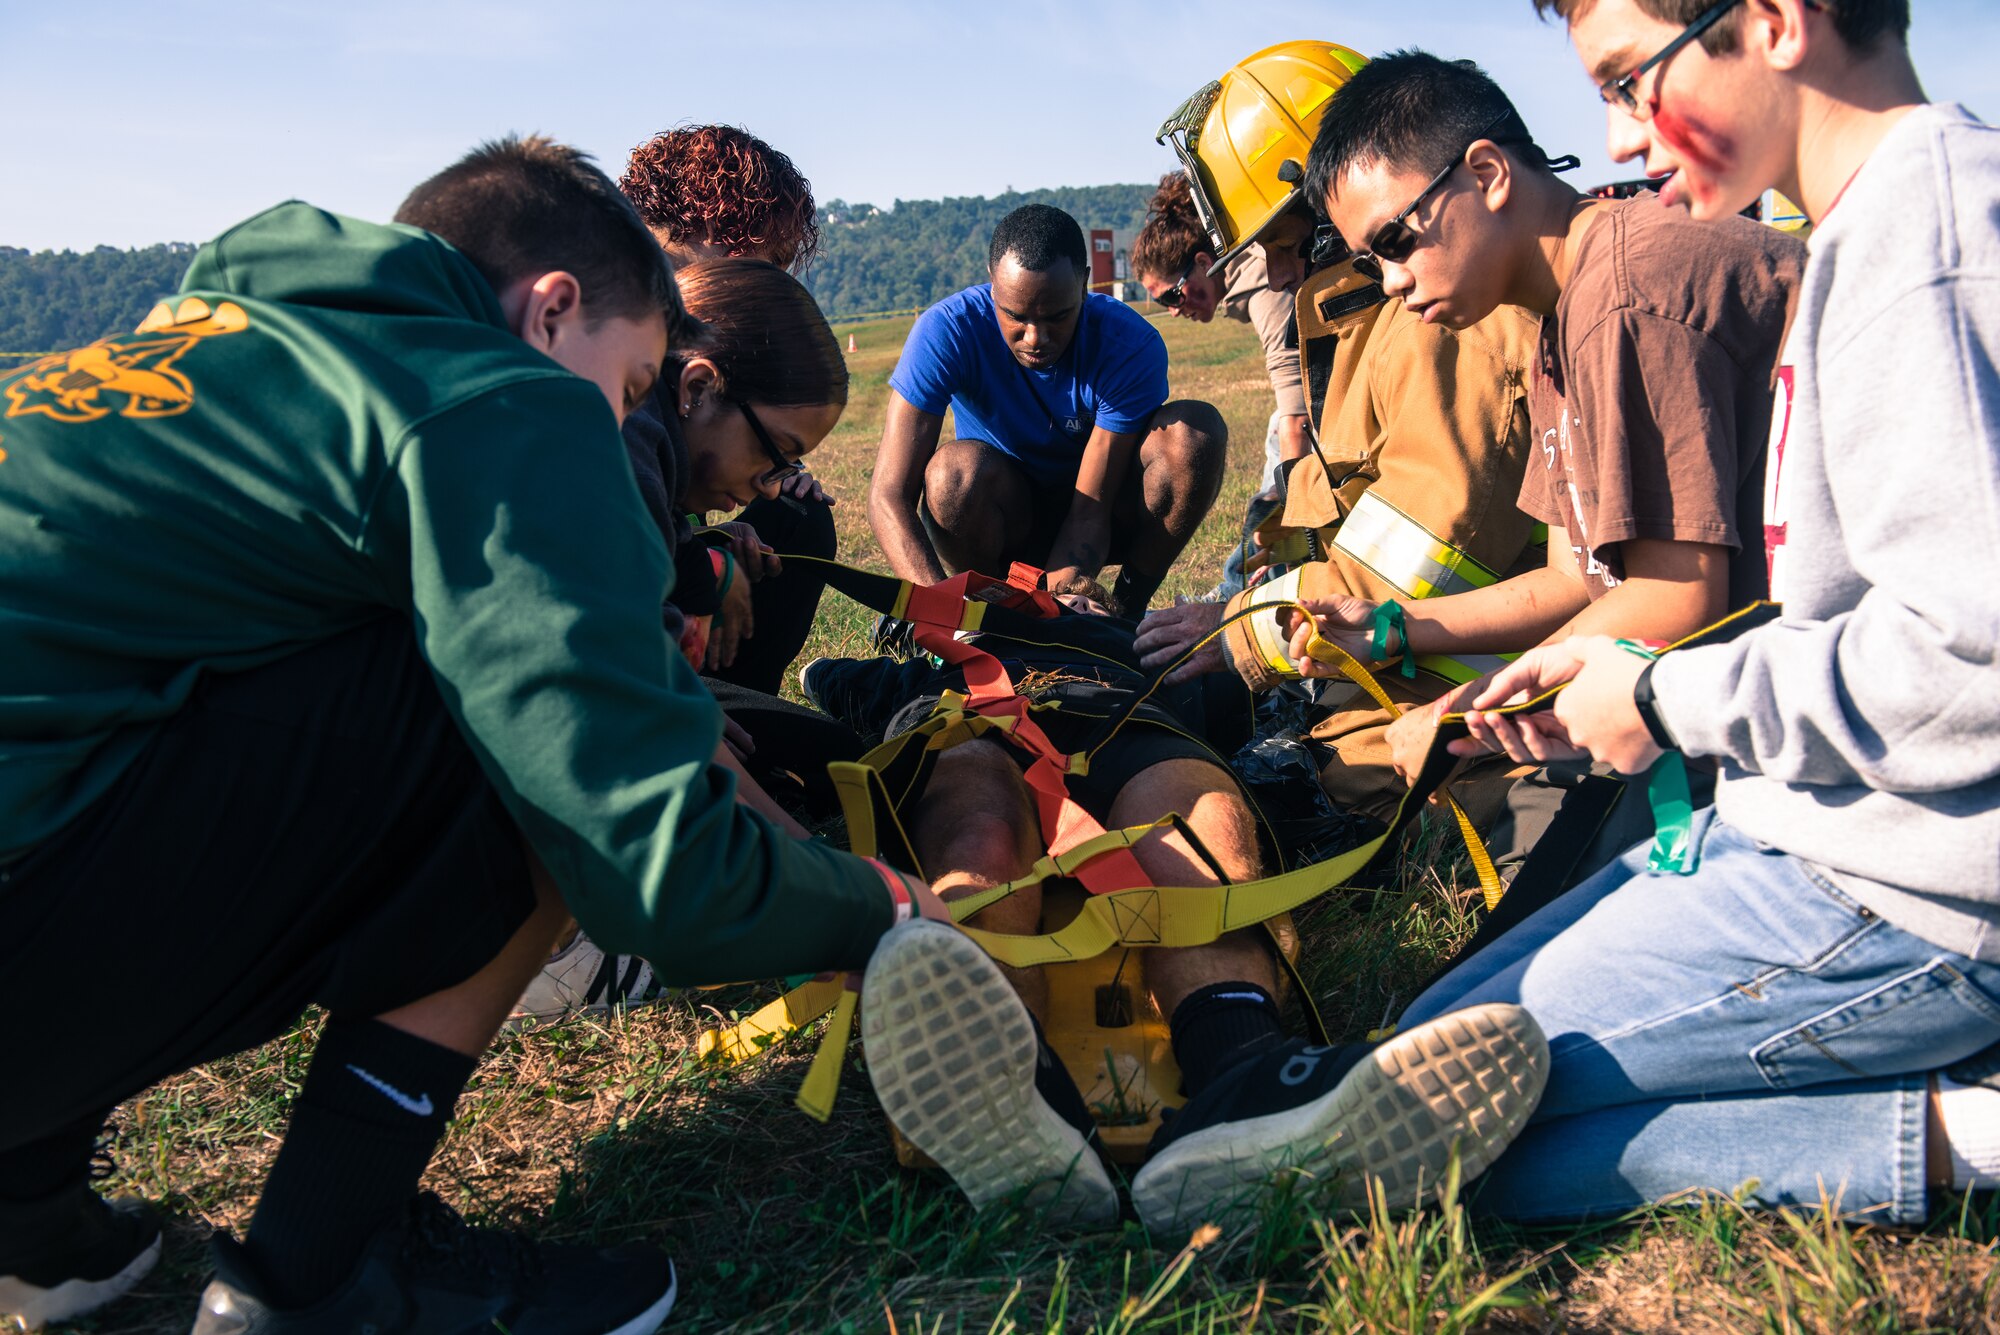 Members of the 193rd Special Operations Wing student flight and local volunteers help firefighters during a simulated aircraft crash during an exercise held at the September 21, 2019, at Harrisburg International Airport, in Middletown, Pennsylvania